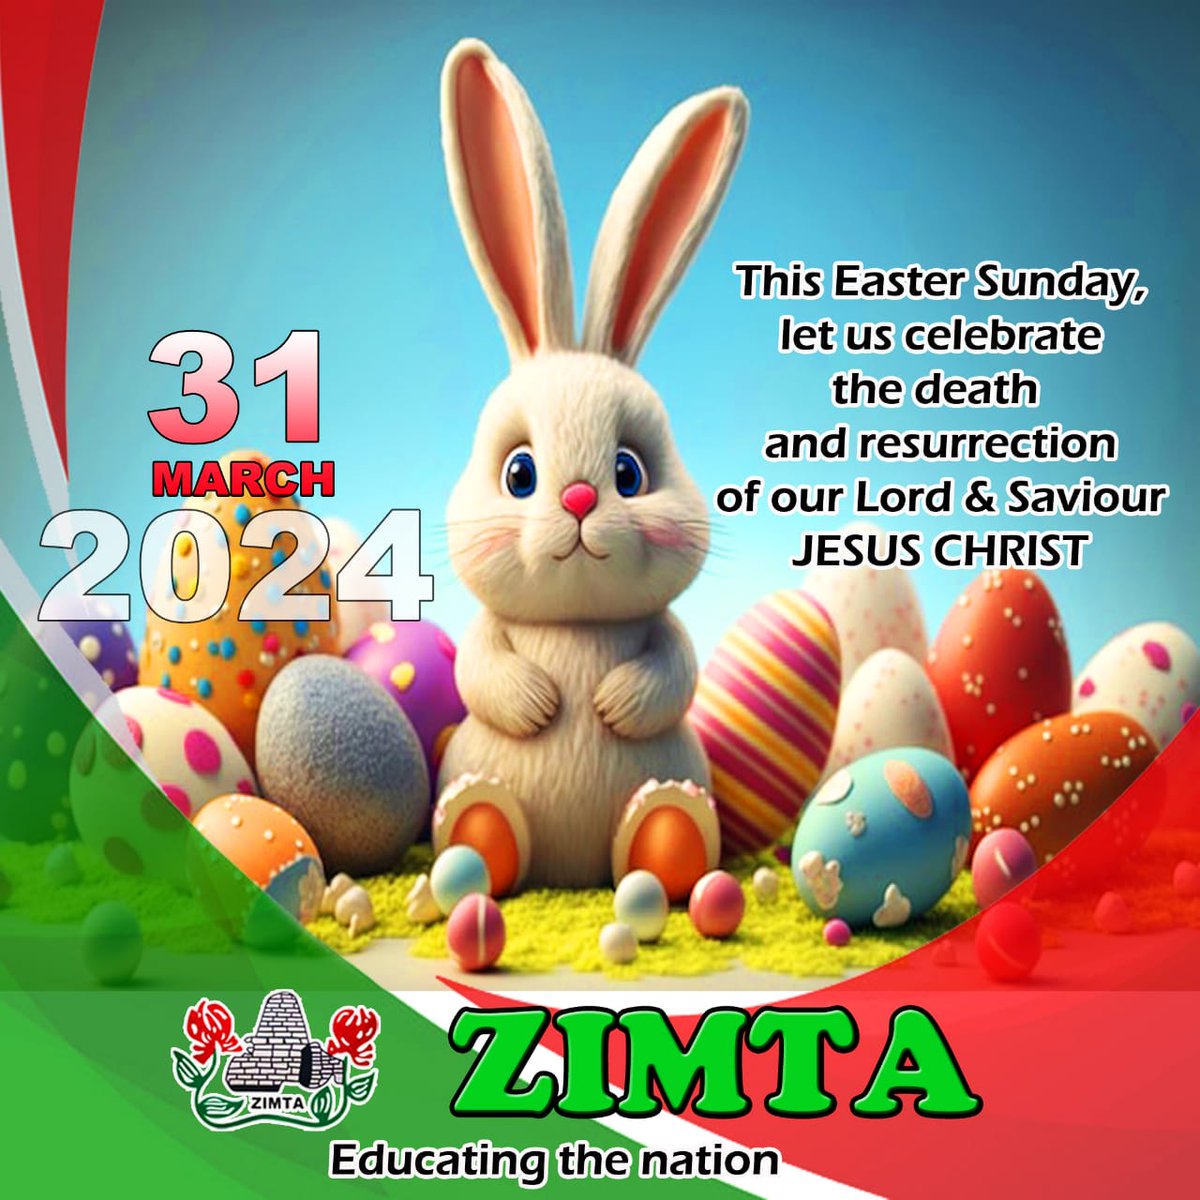 Warmest wishes for a joyful and blessed Easter Sunday!